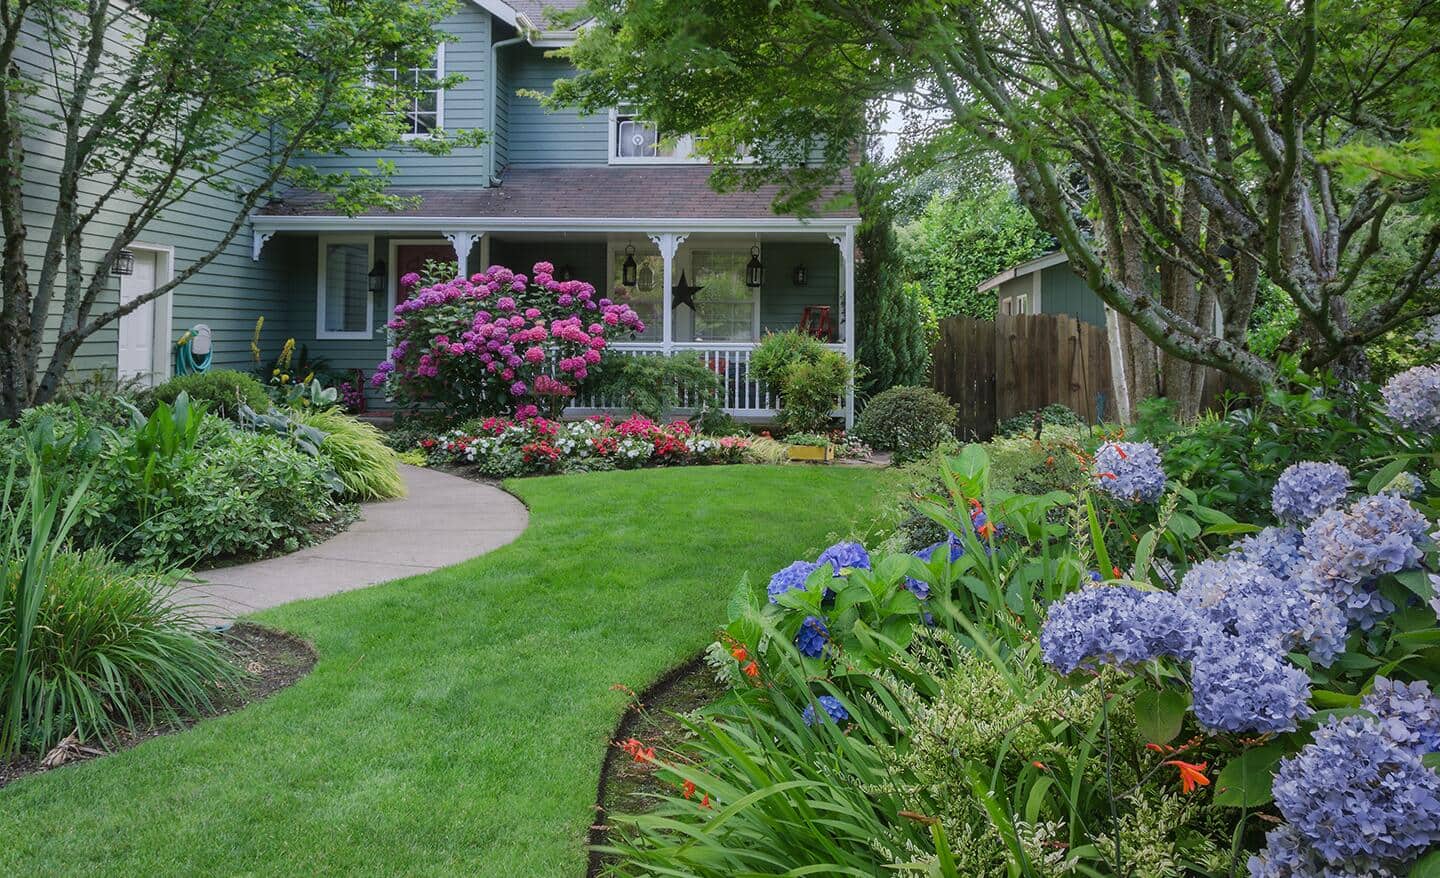 A suburban home with flowers and plants.